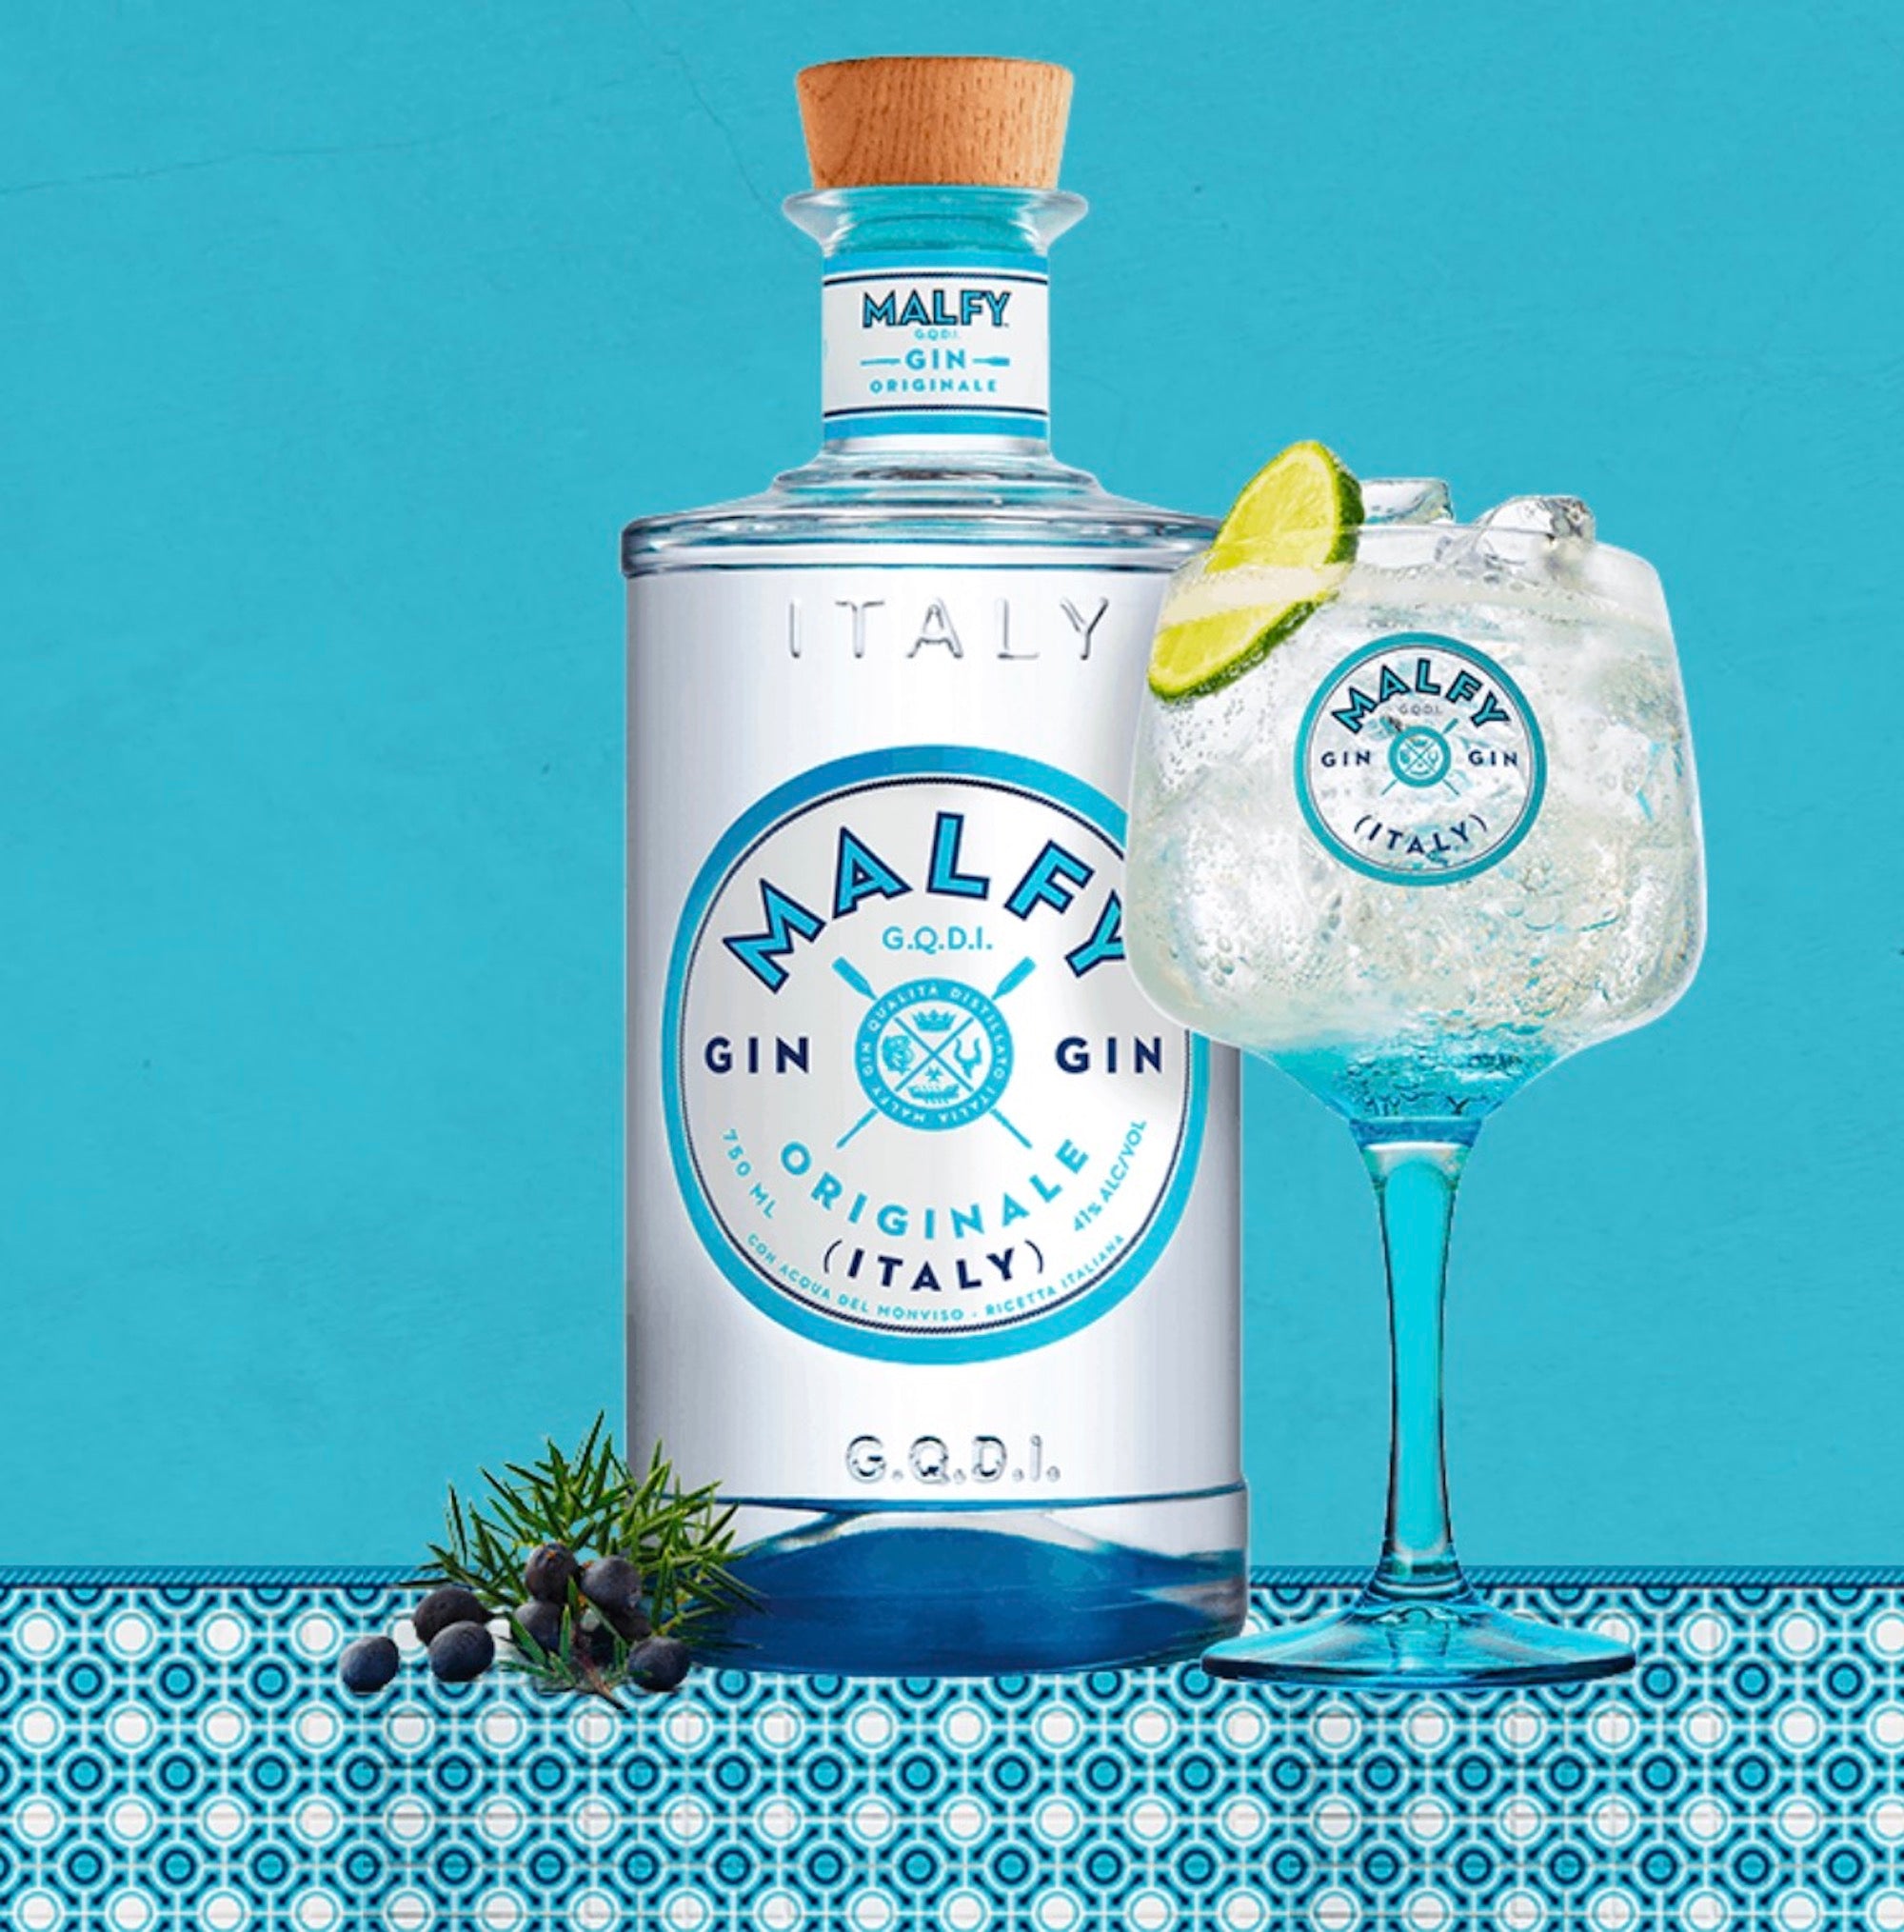 MALFY GIN CON LIMONE ITALY BOTTLE (EMPTY)